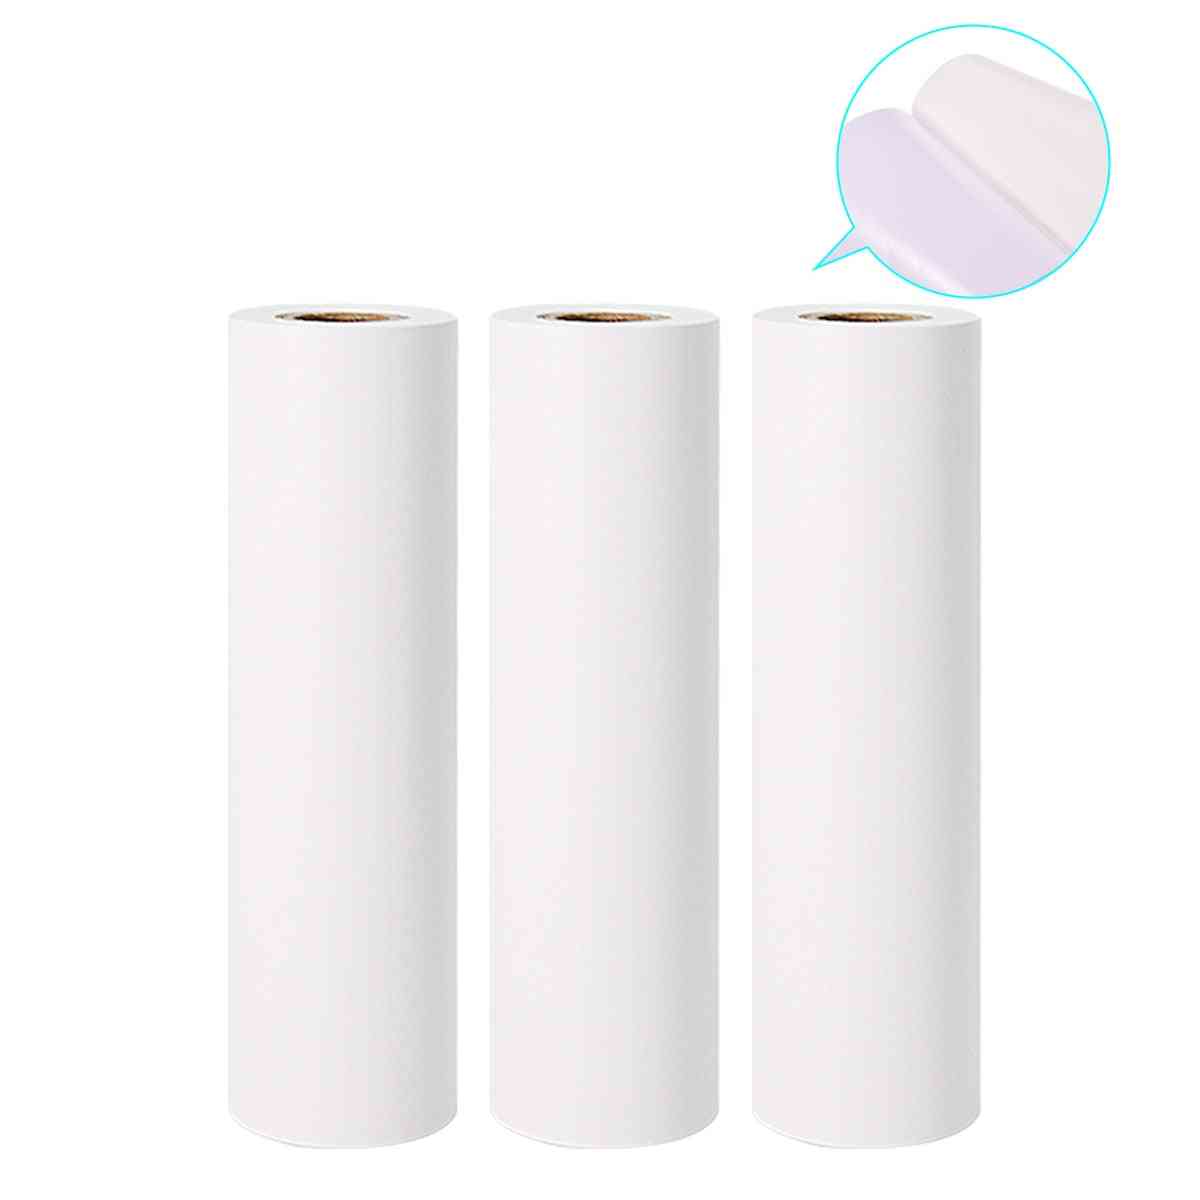 White Self-adhesive Thermal Paper Roll Printable Sticker